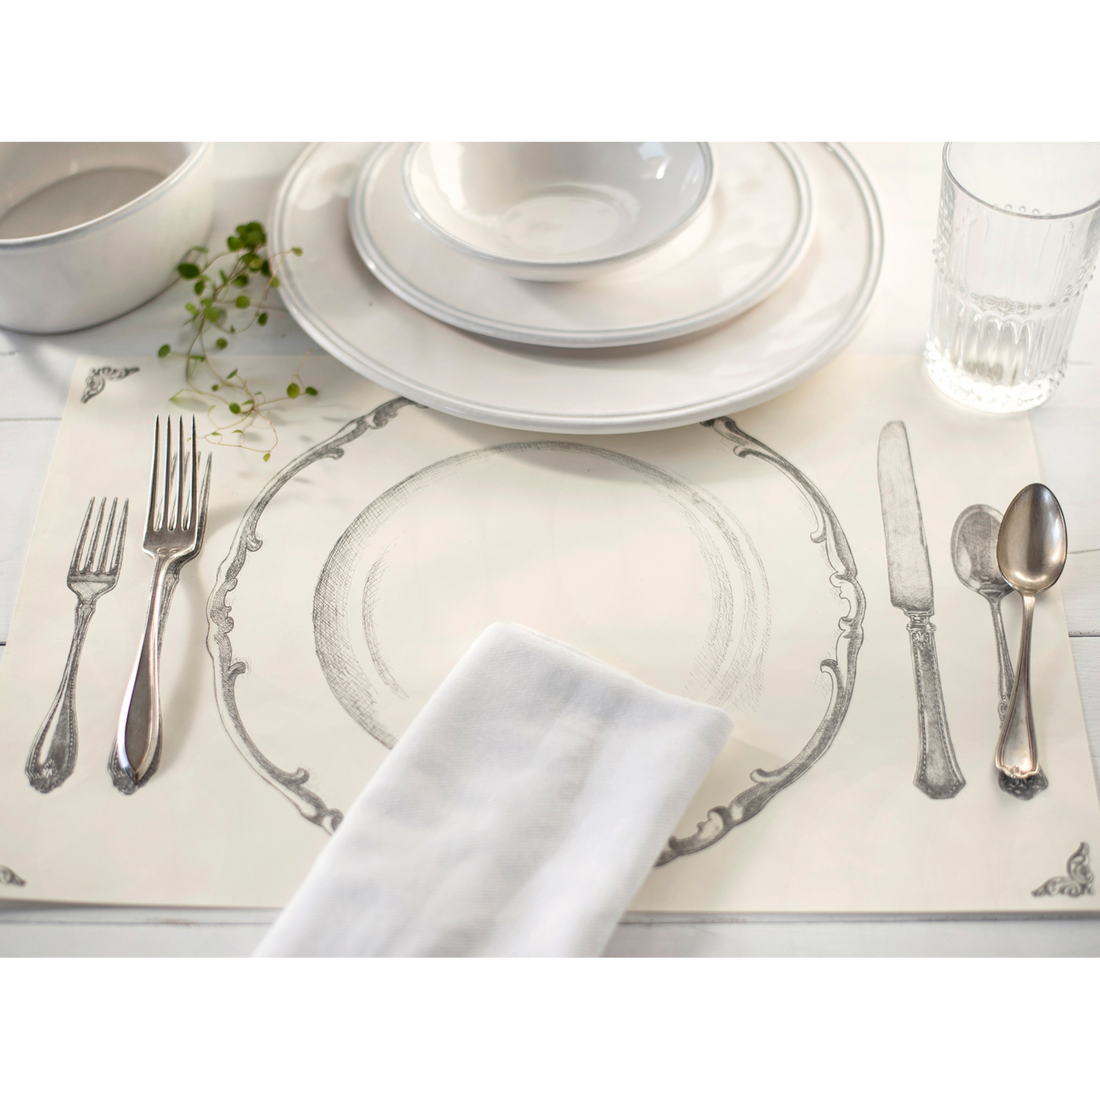 The Perfect Setting Placemat under an elegant place setting.